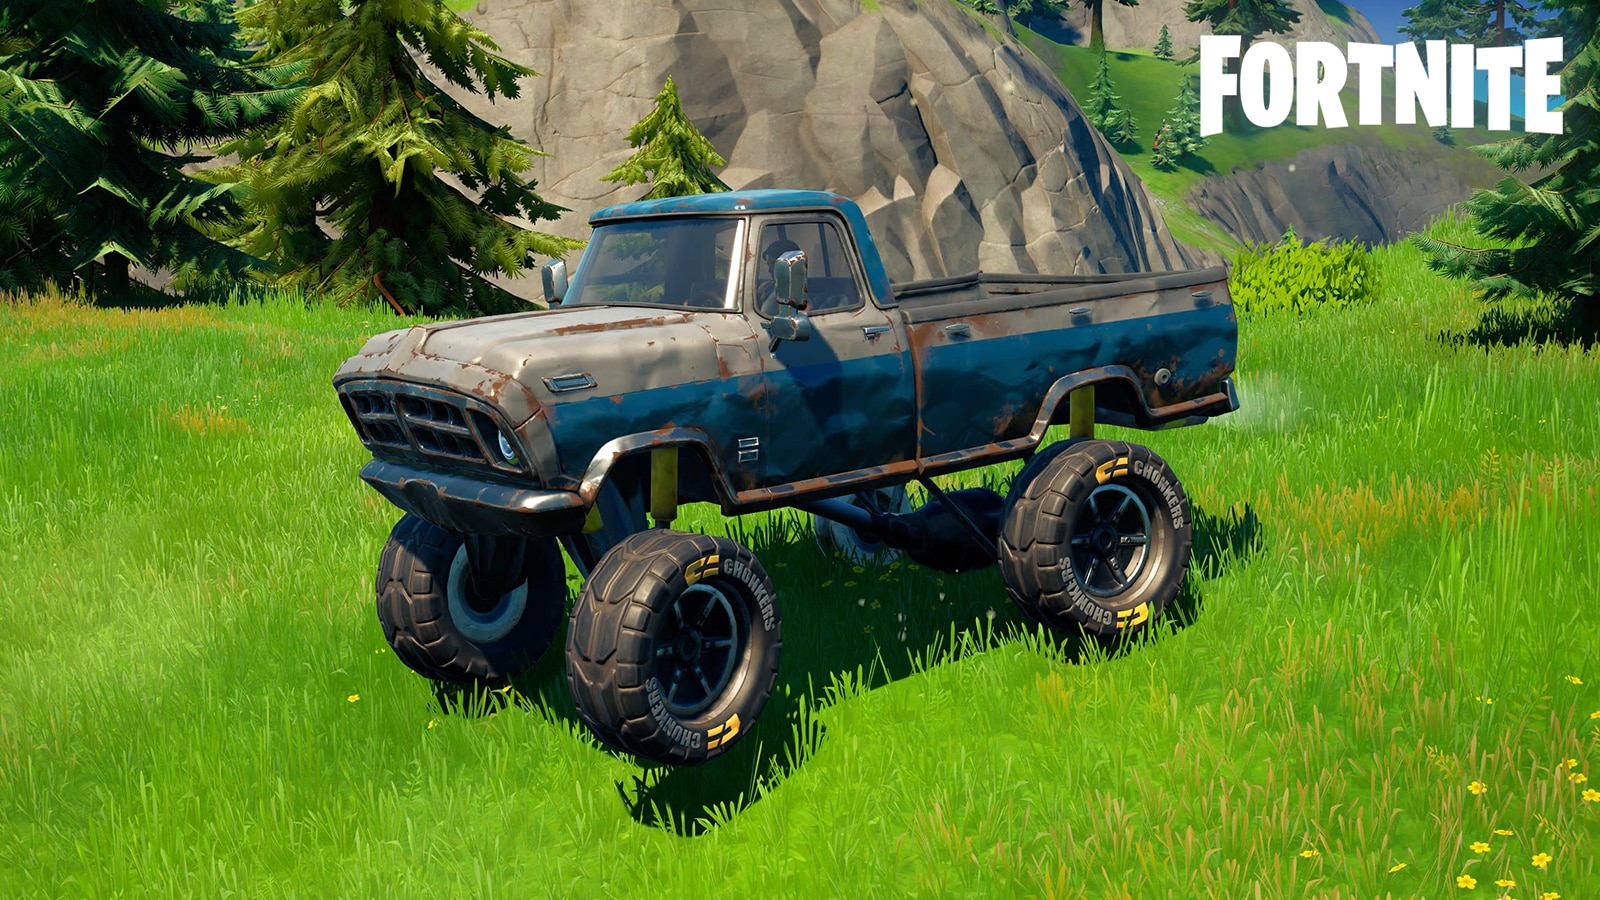 Fortnite-vehicle-mods-chonkers-tires-1. Fortnite: Where to Modify Vehicles with...